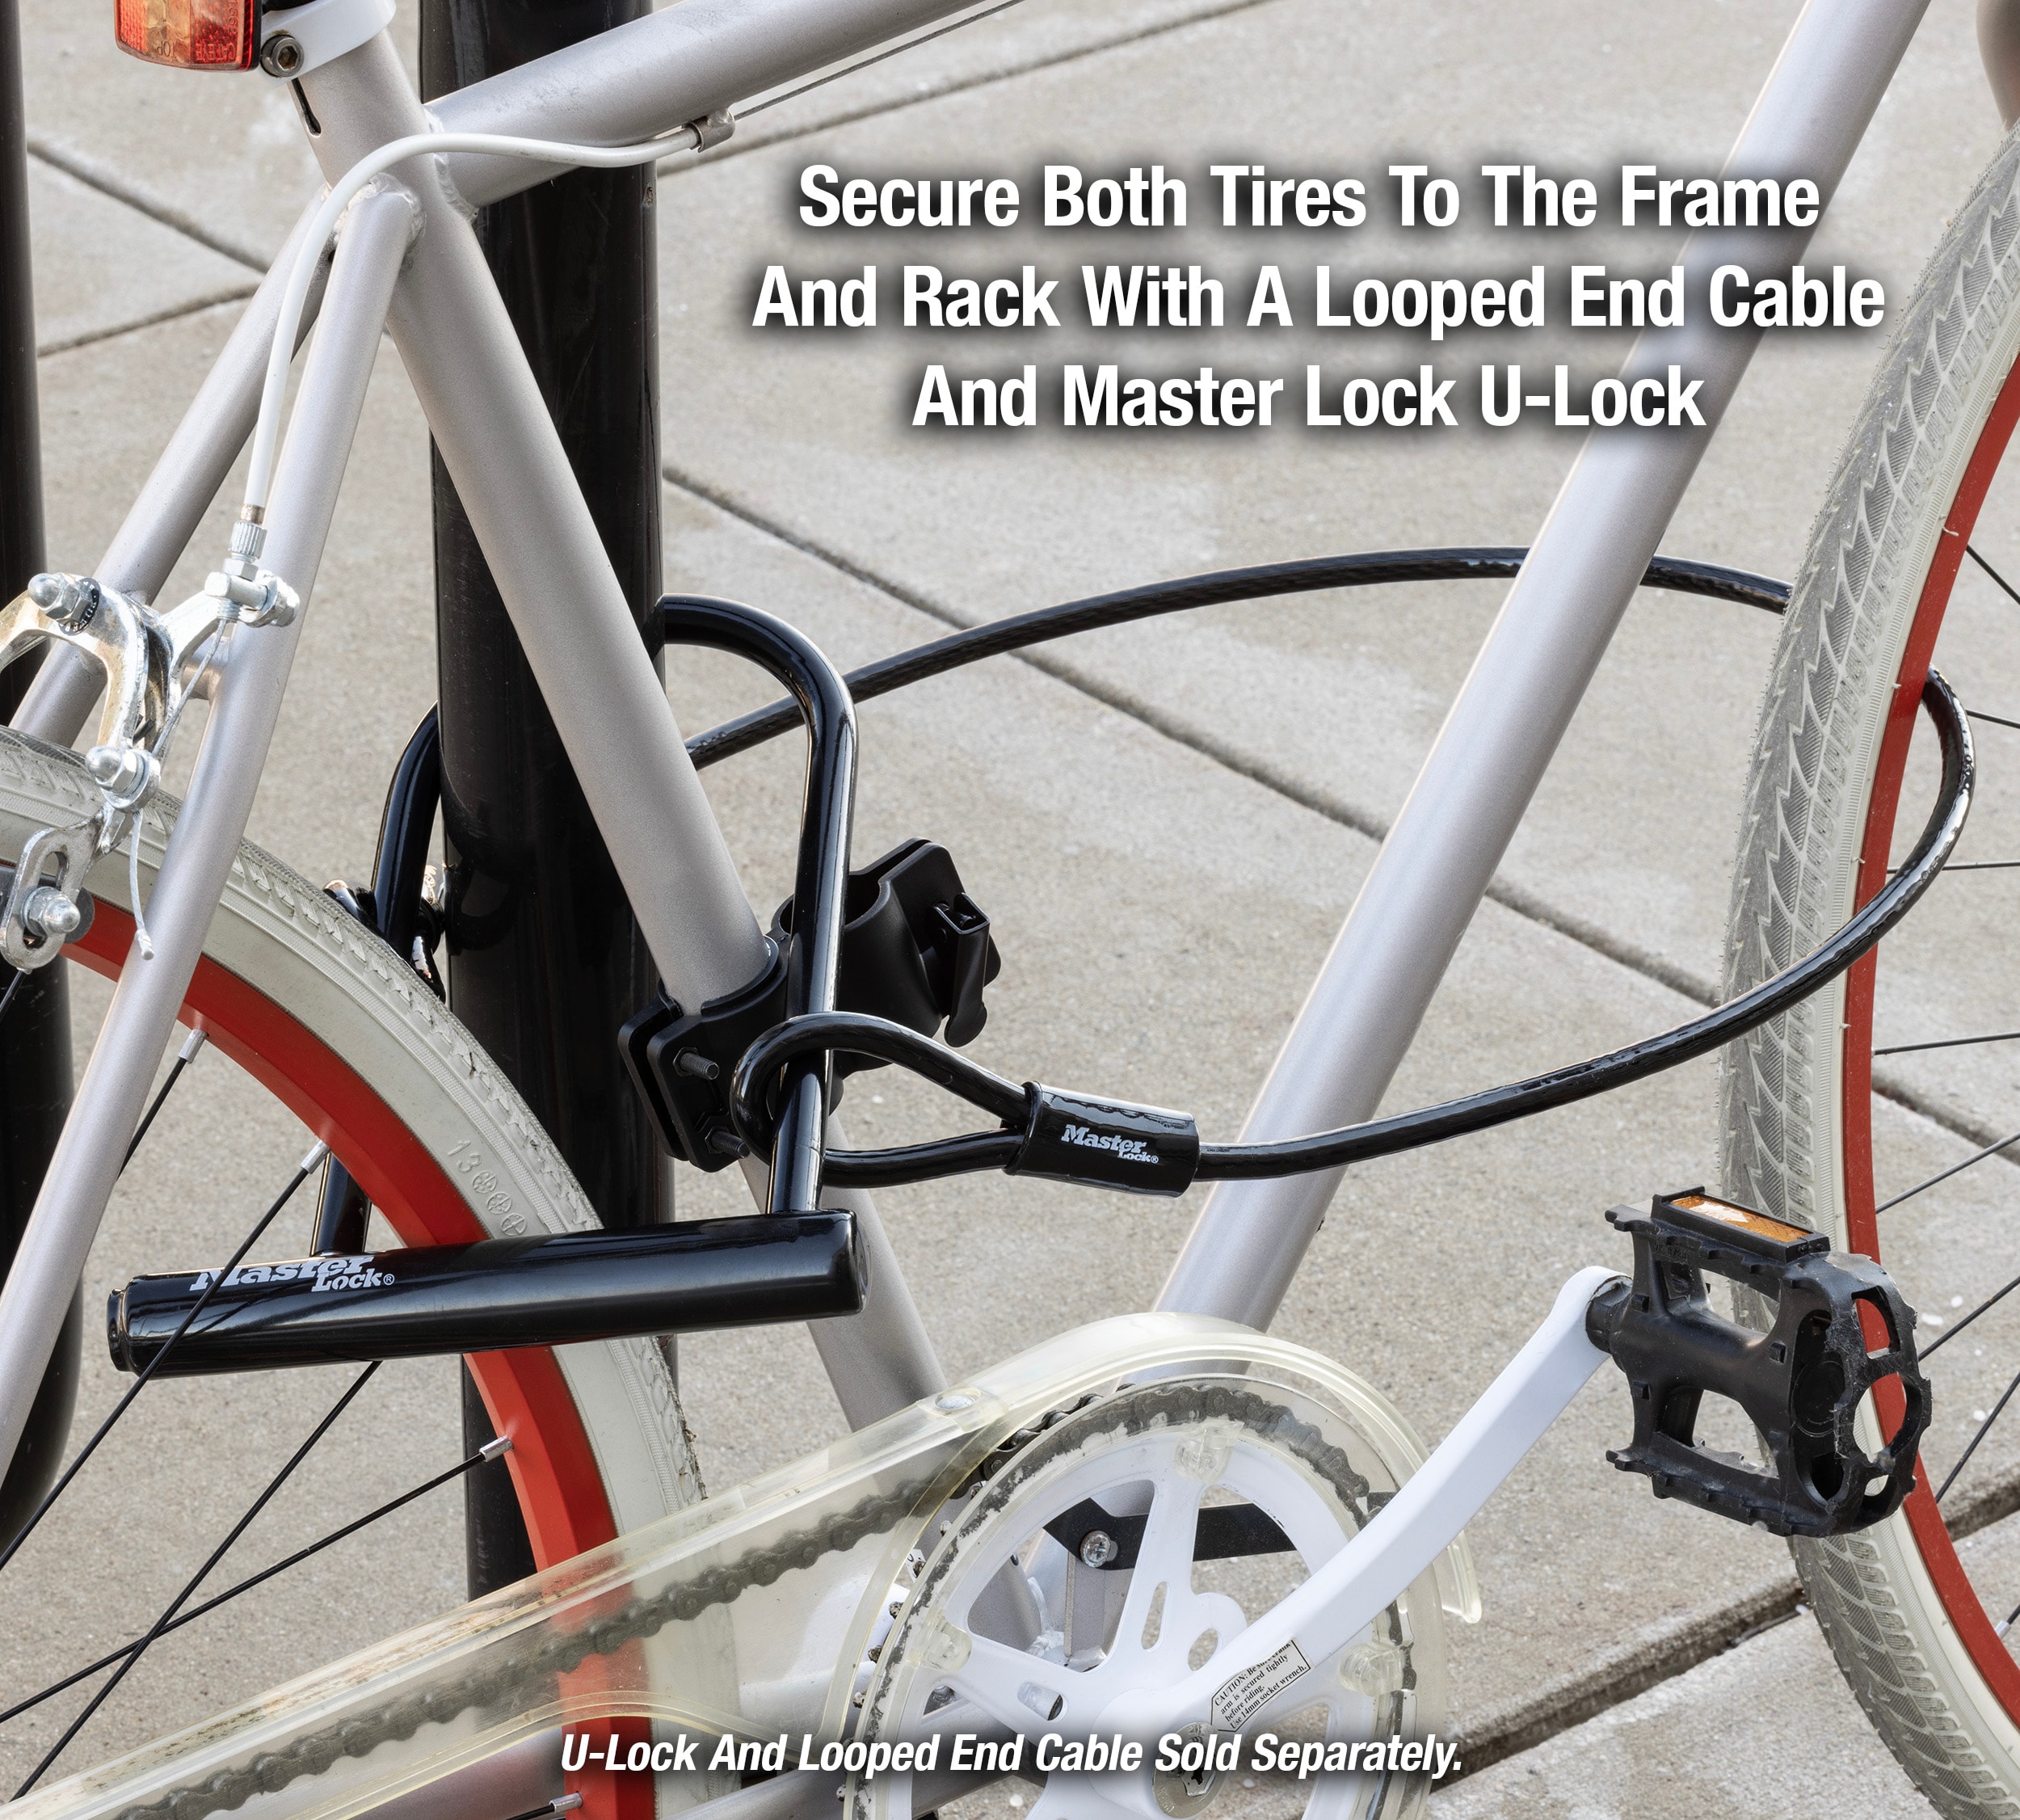 8' Locking Cable For Added Security When Transporting Your Bikes